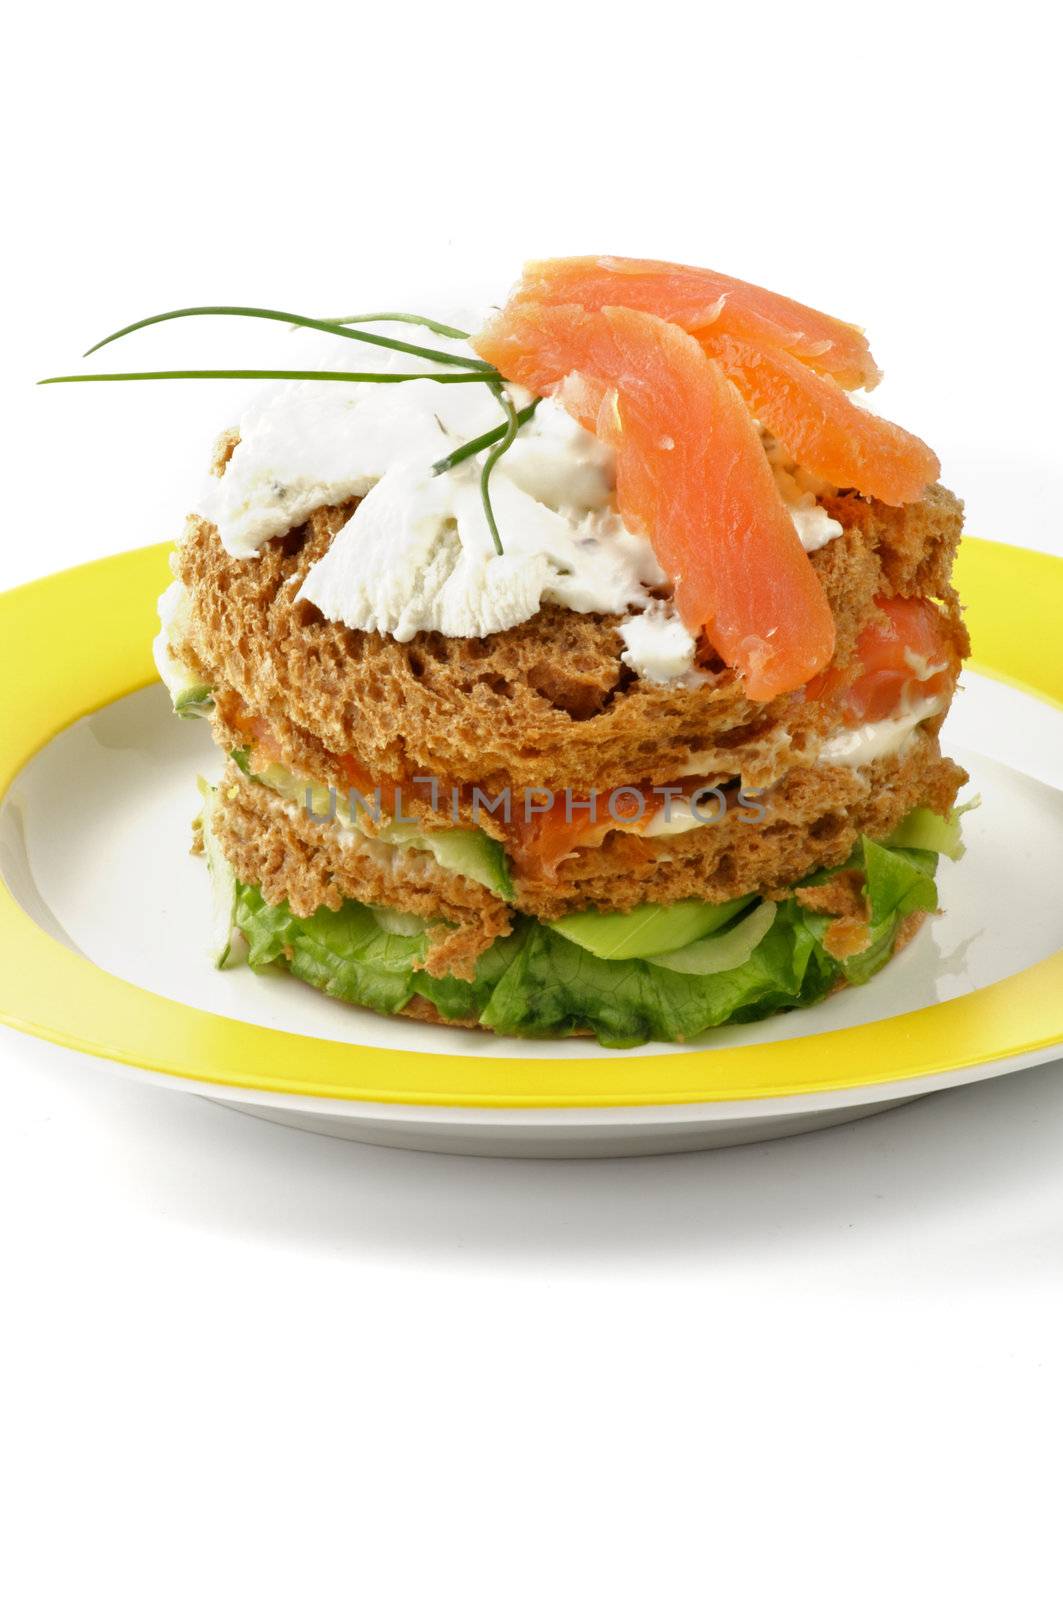 Big Tasty Sandwich with Salmon, Greens, Spring Onion and Cream Cheese on Yellow Plate closeup